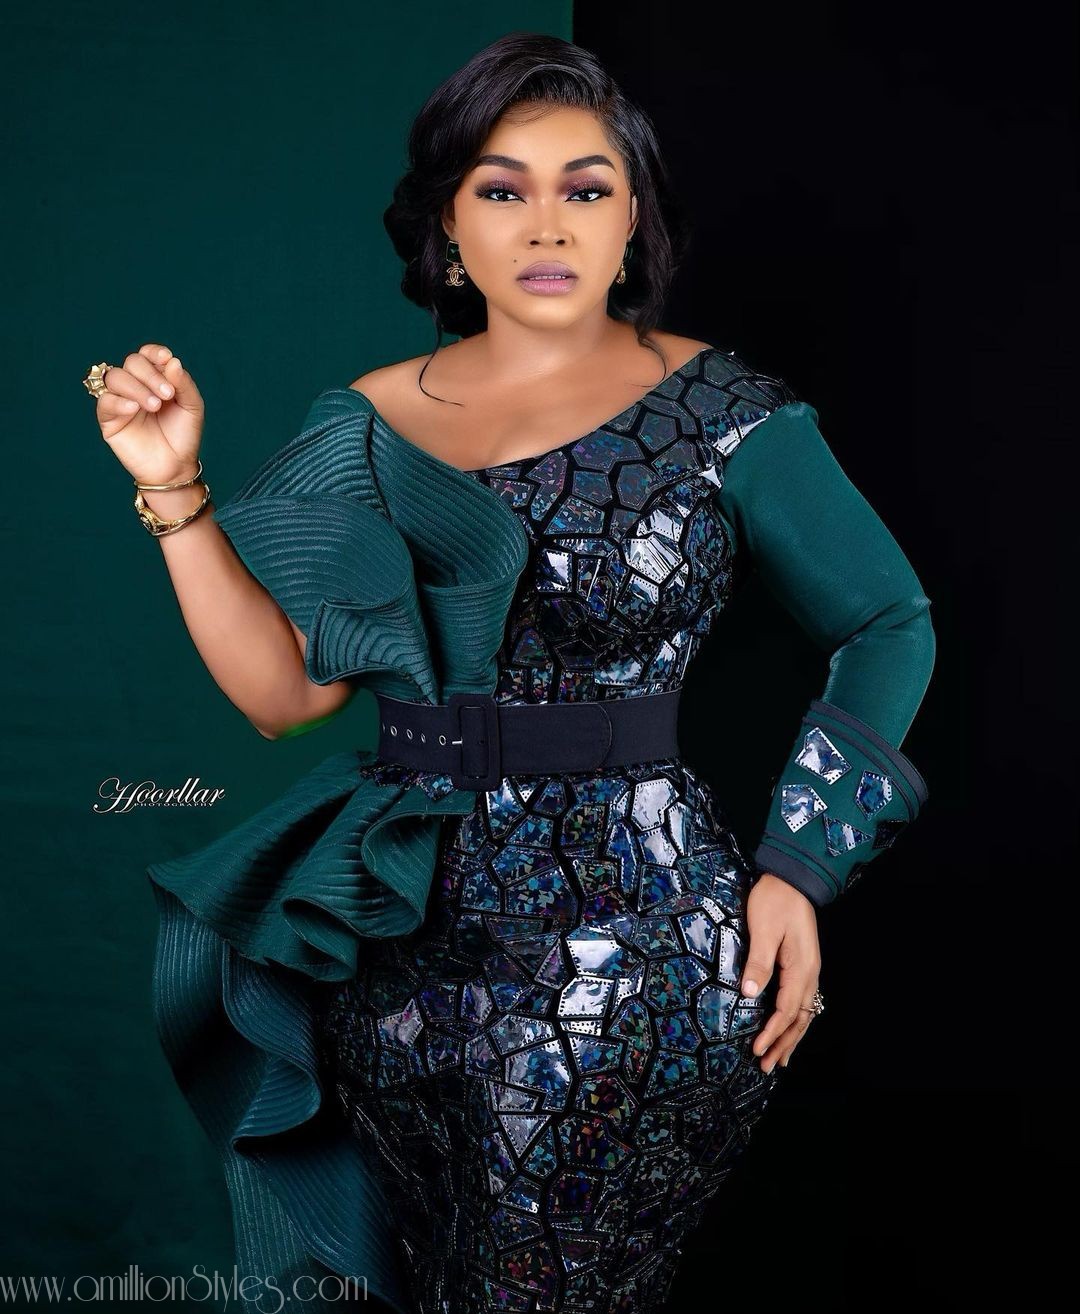 Let's Throwback To Toyin Lawani's #theartistandhismuse2021 Asoebi Styles